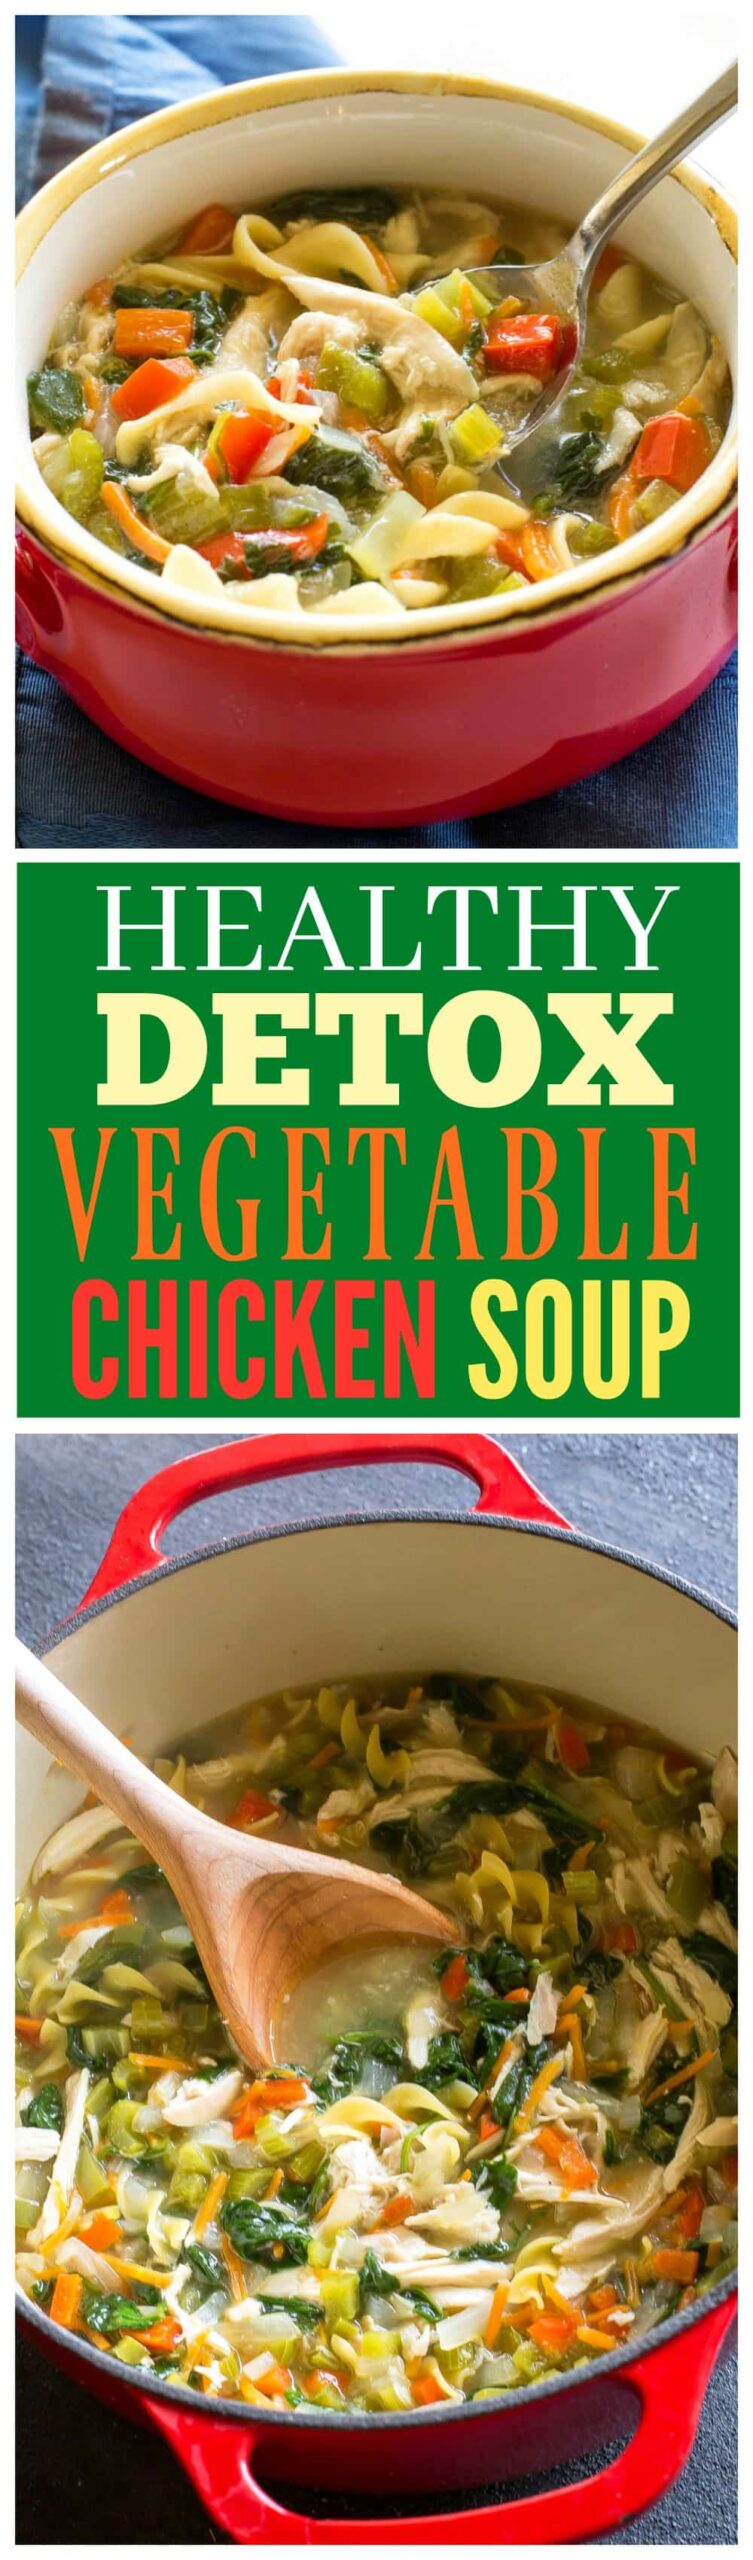 Healthy Vegetable Chicken Soup - this soup is FULL of veggies and great to detox when you need to eat healthy! #healthy #vegetable #chicken #soup #dinner